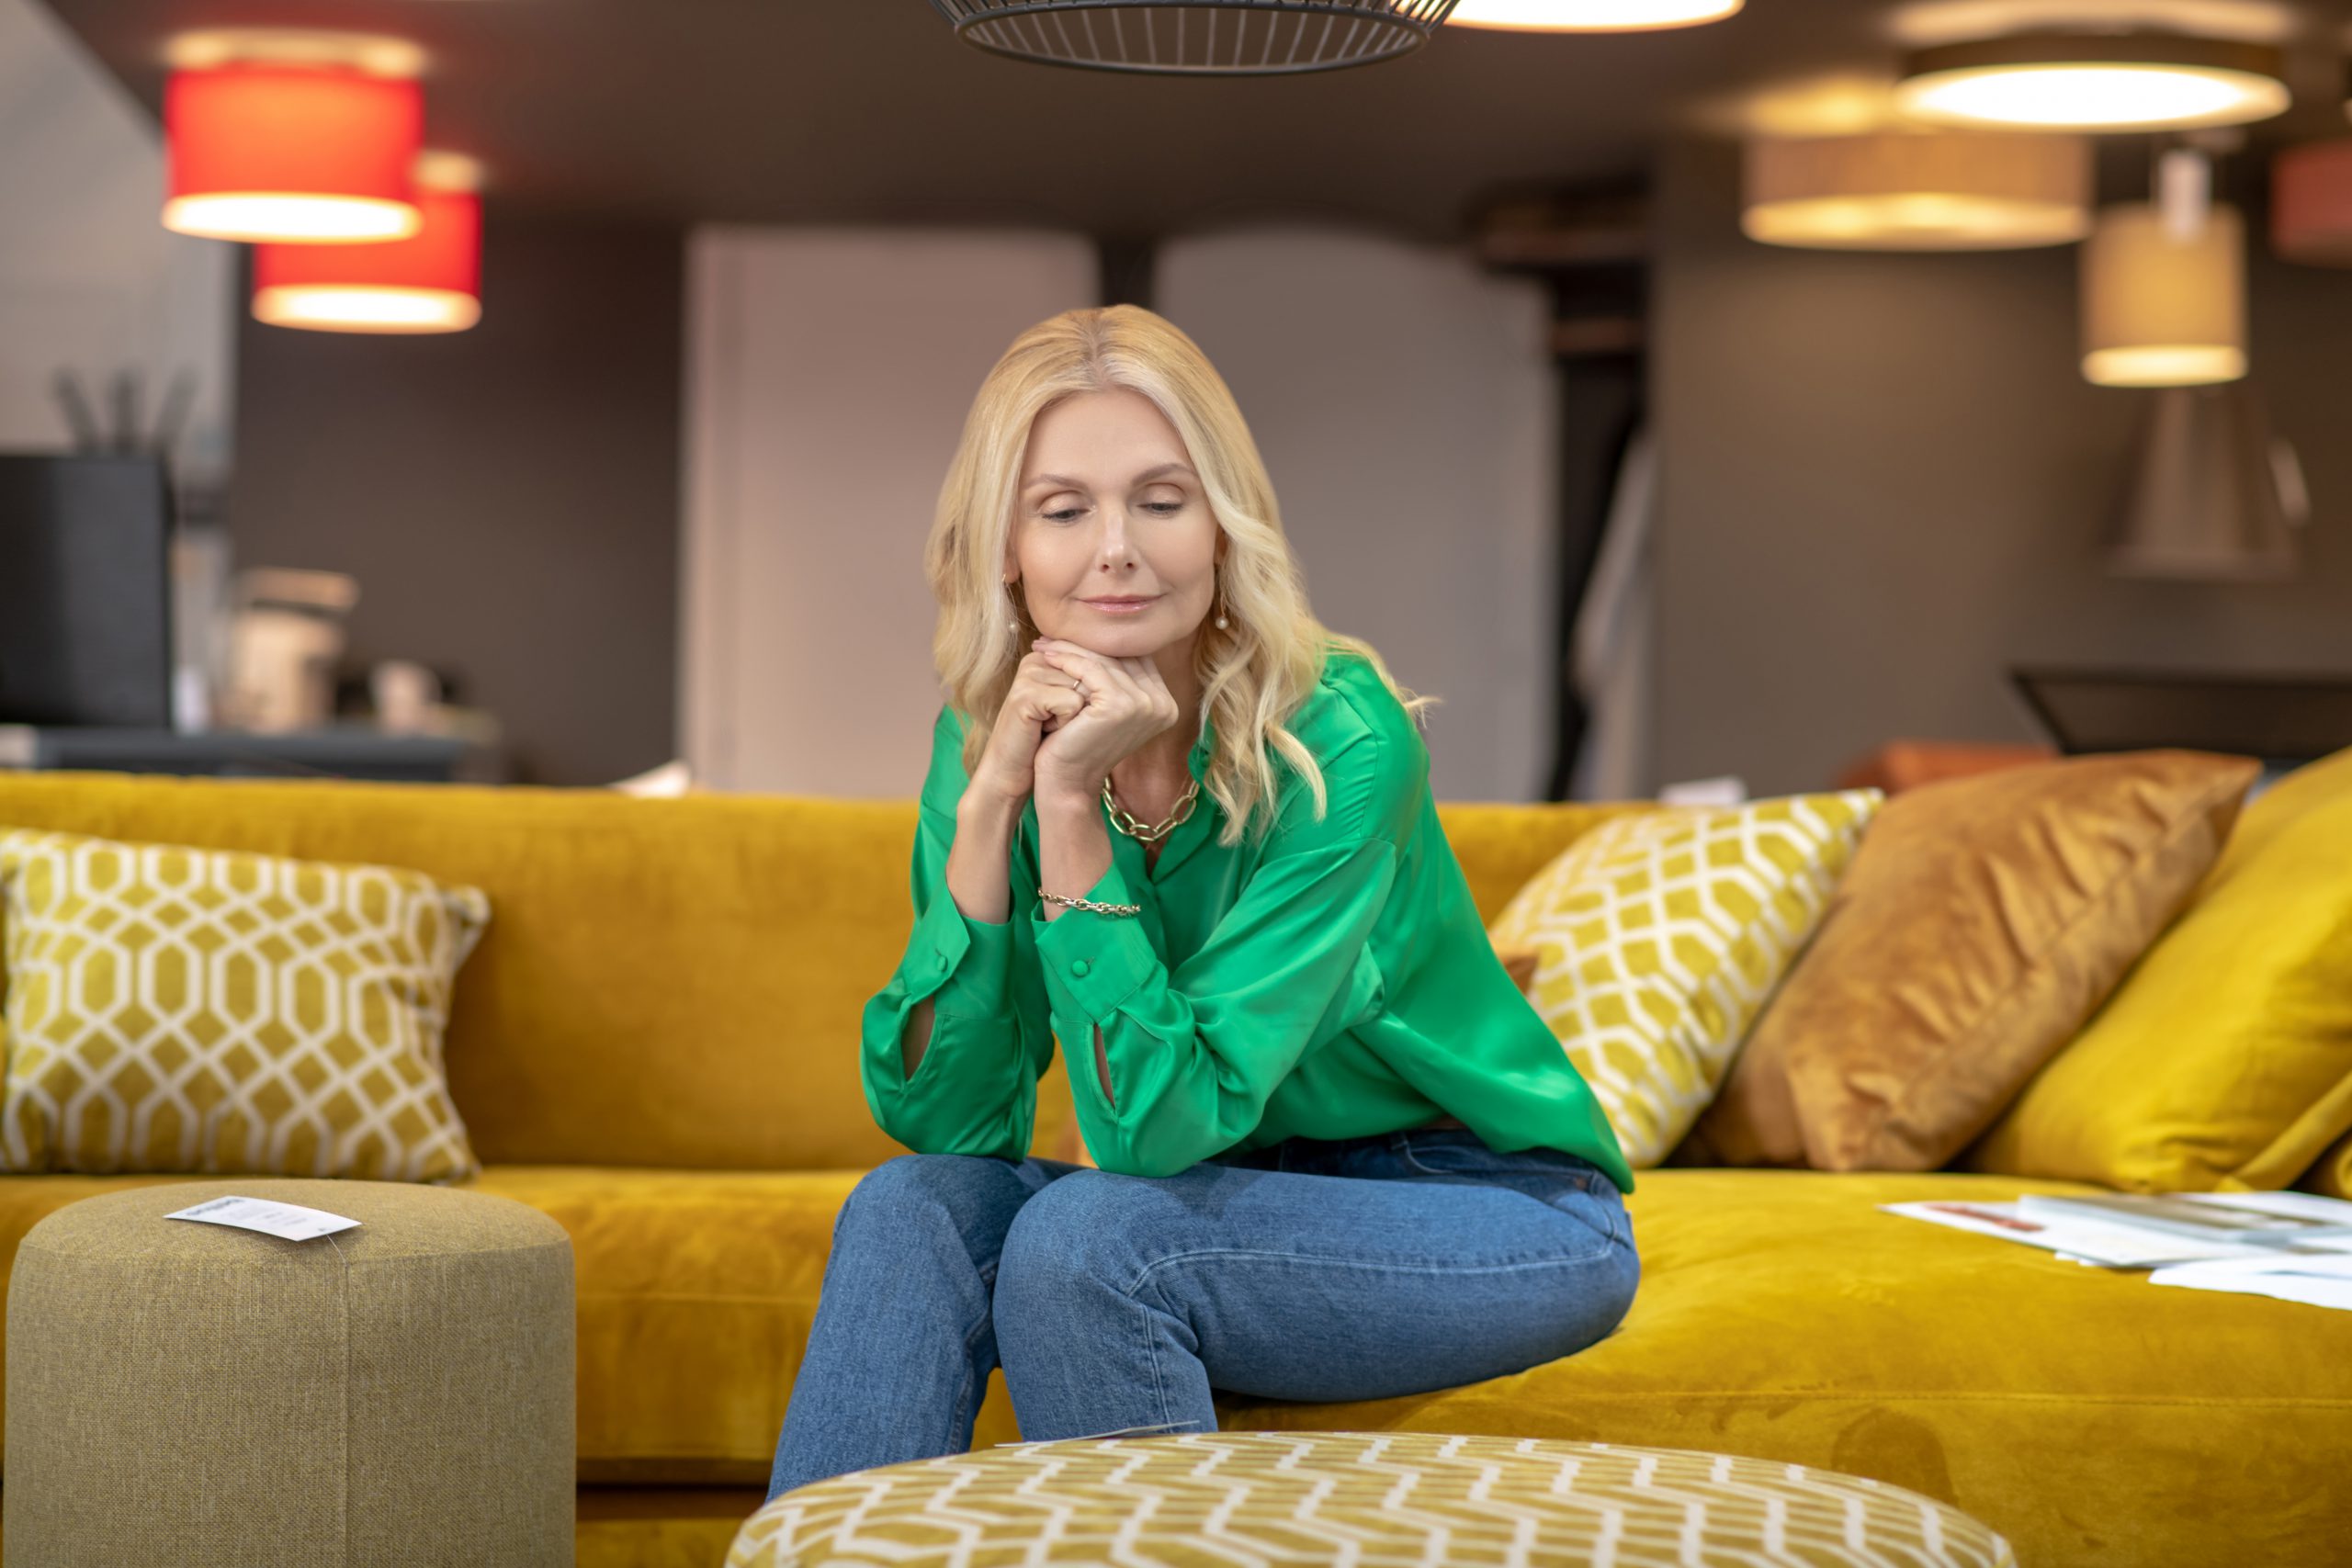 Blonde Woman In A Green Blouse Sitting On A Yellow 2021 09 04 11 42 27 Utc